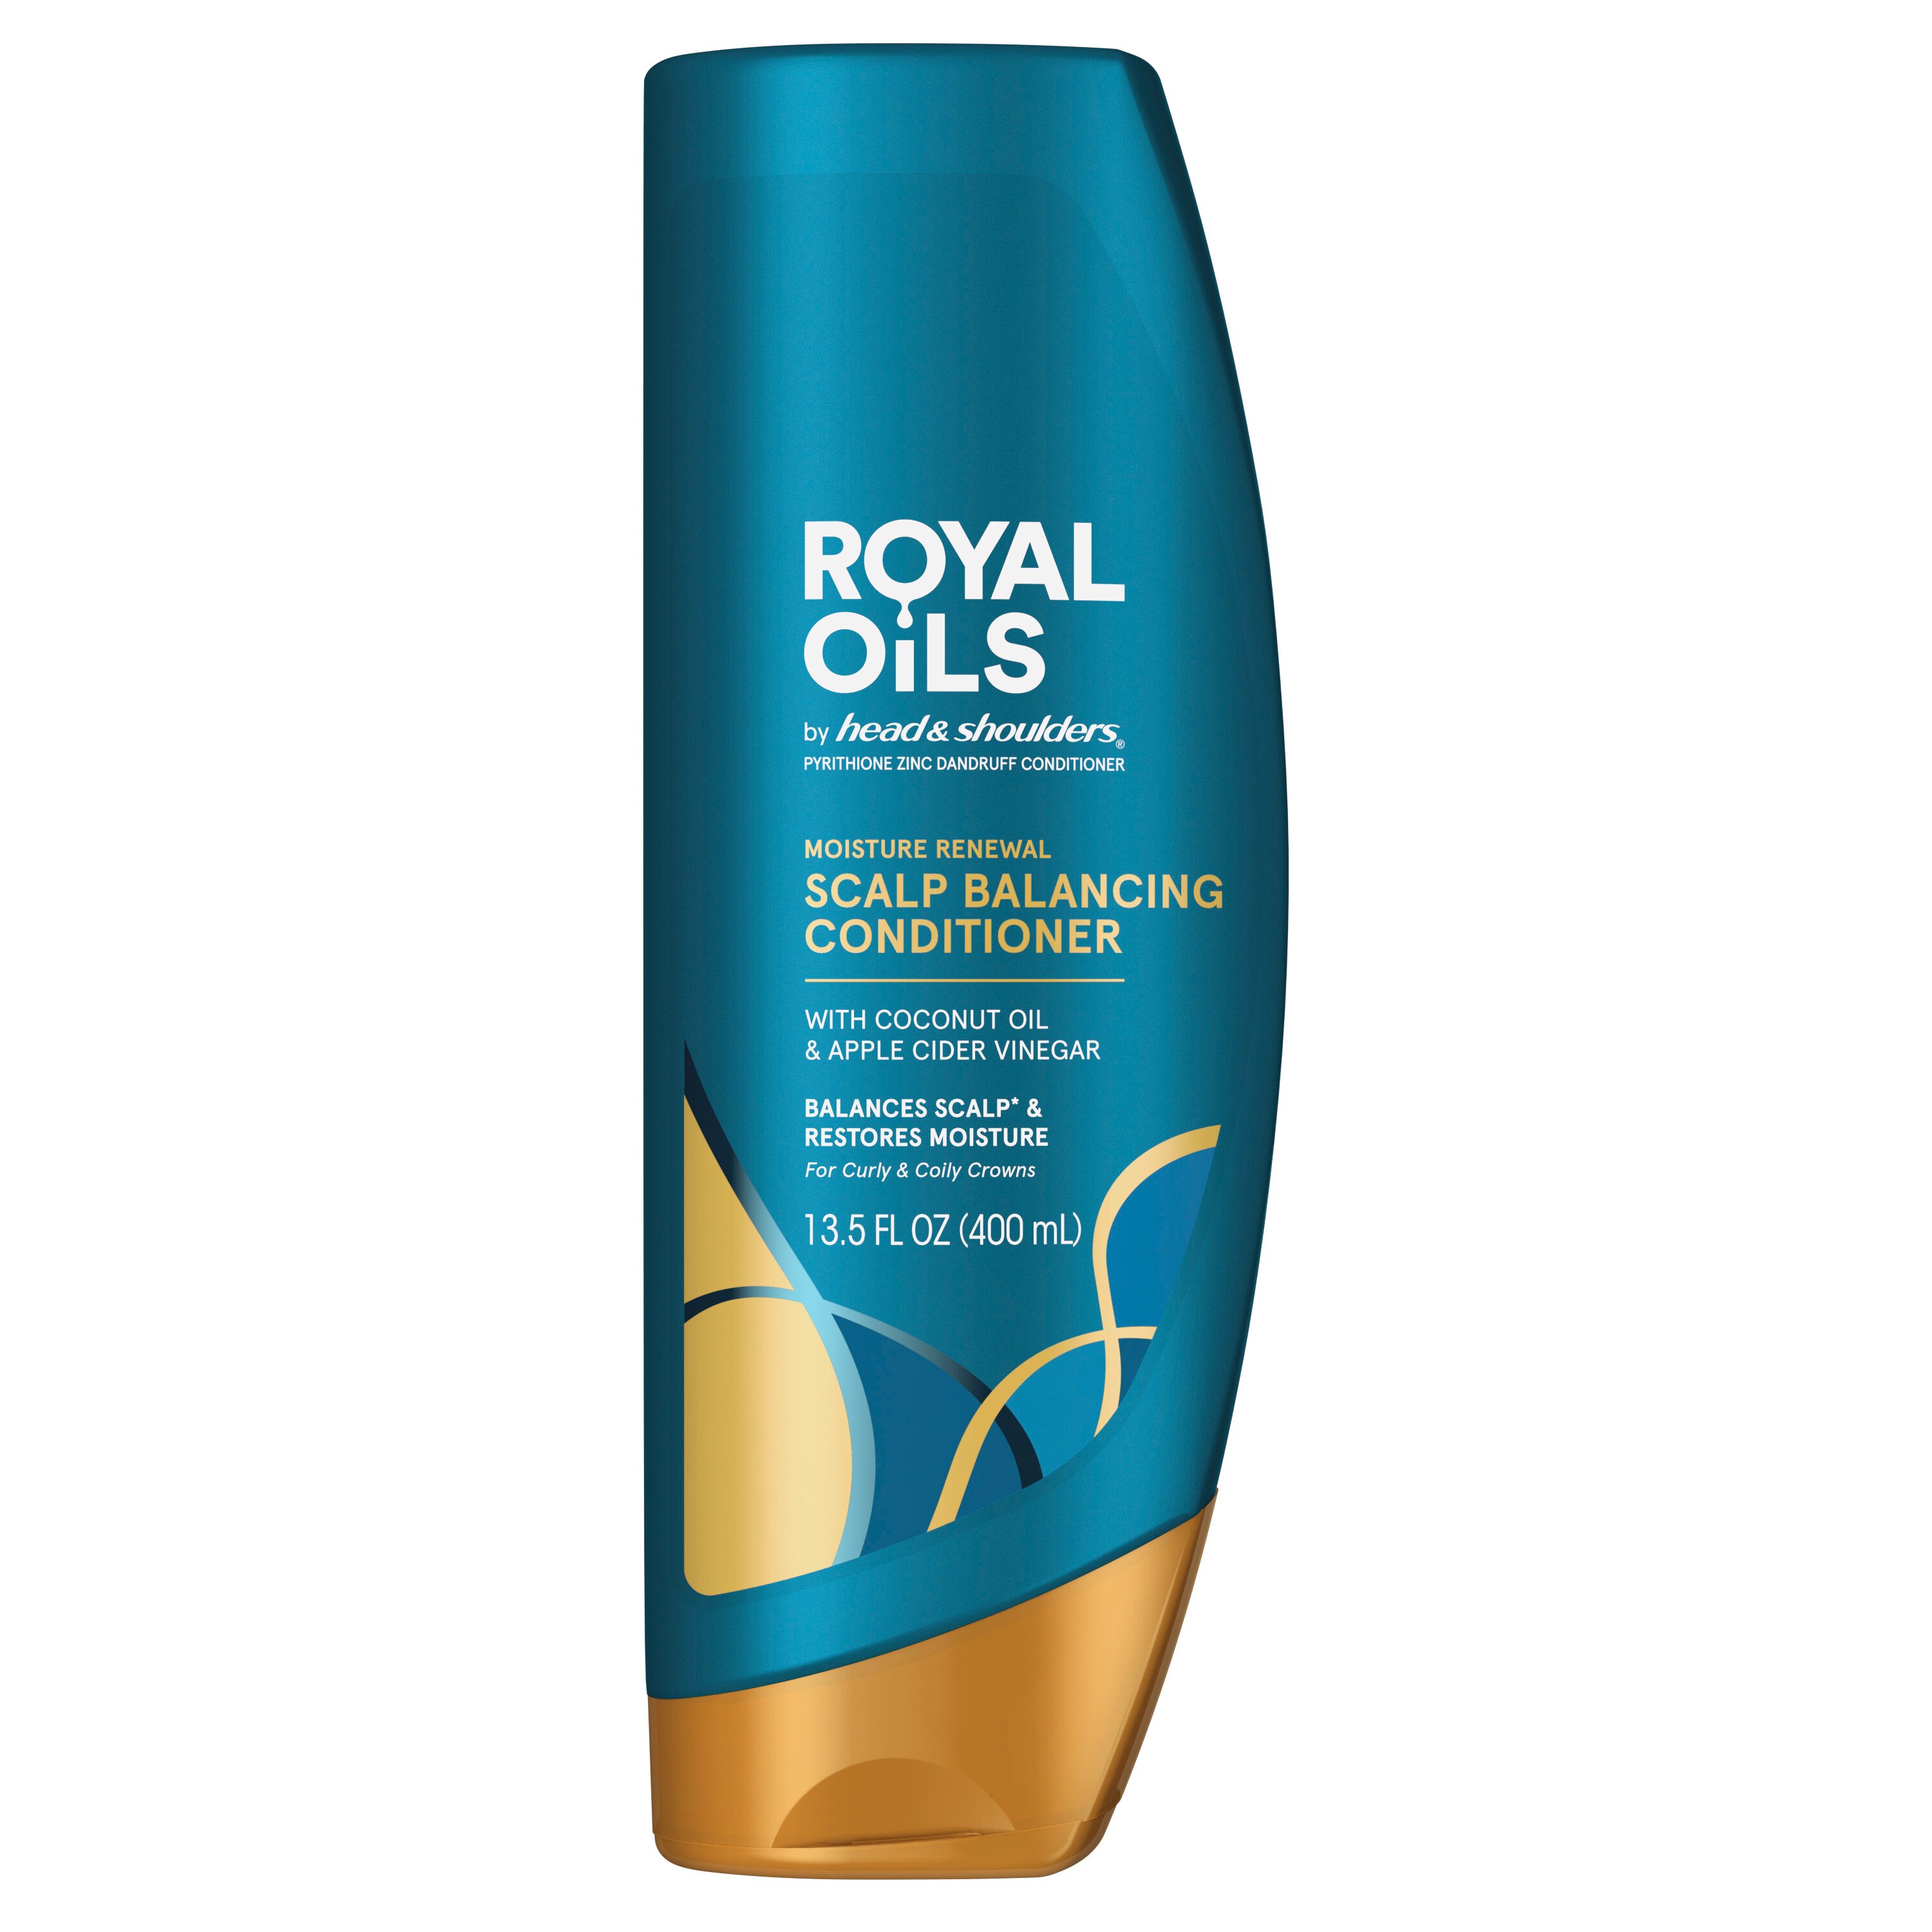 Head and Shoulders Royal Oils Moisture Renewal Conditioner with Coconut Oil, 13.5 OZ